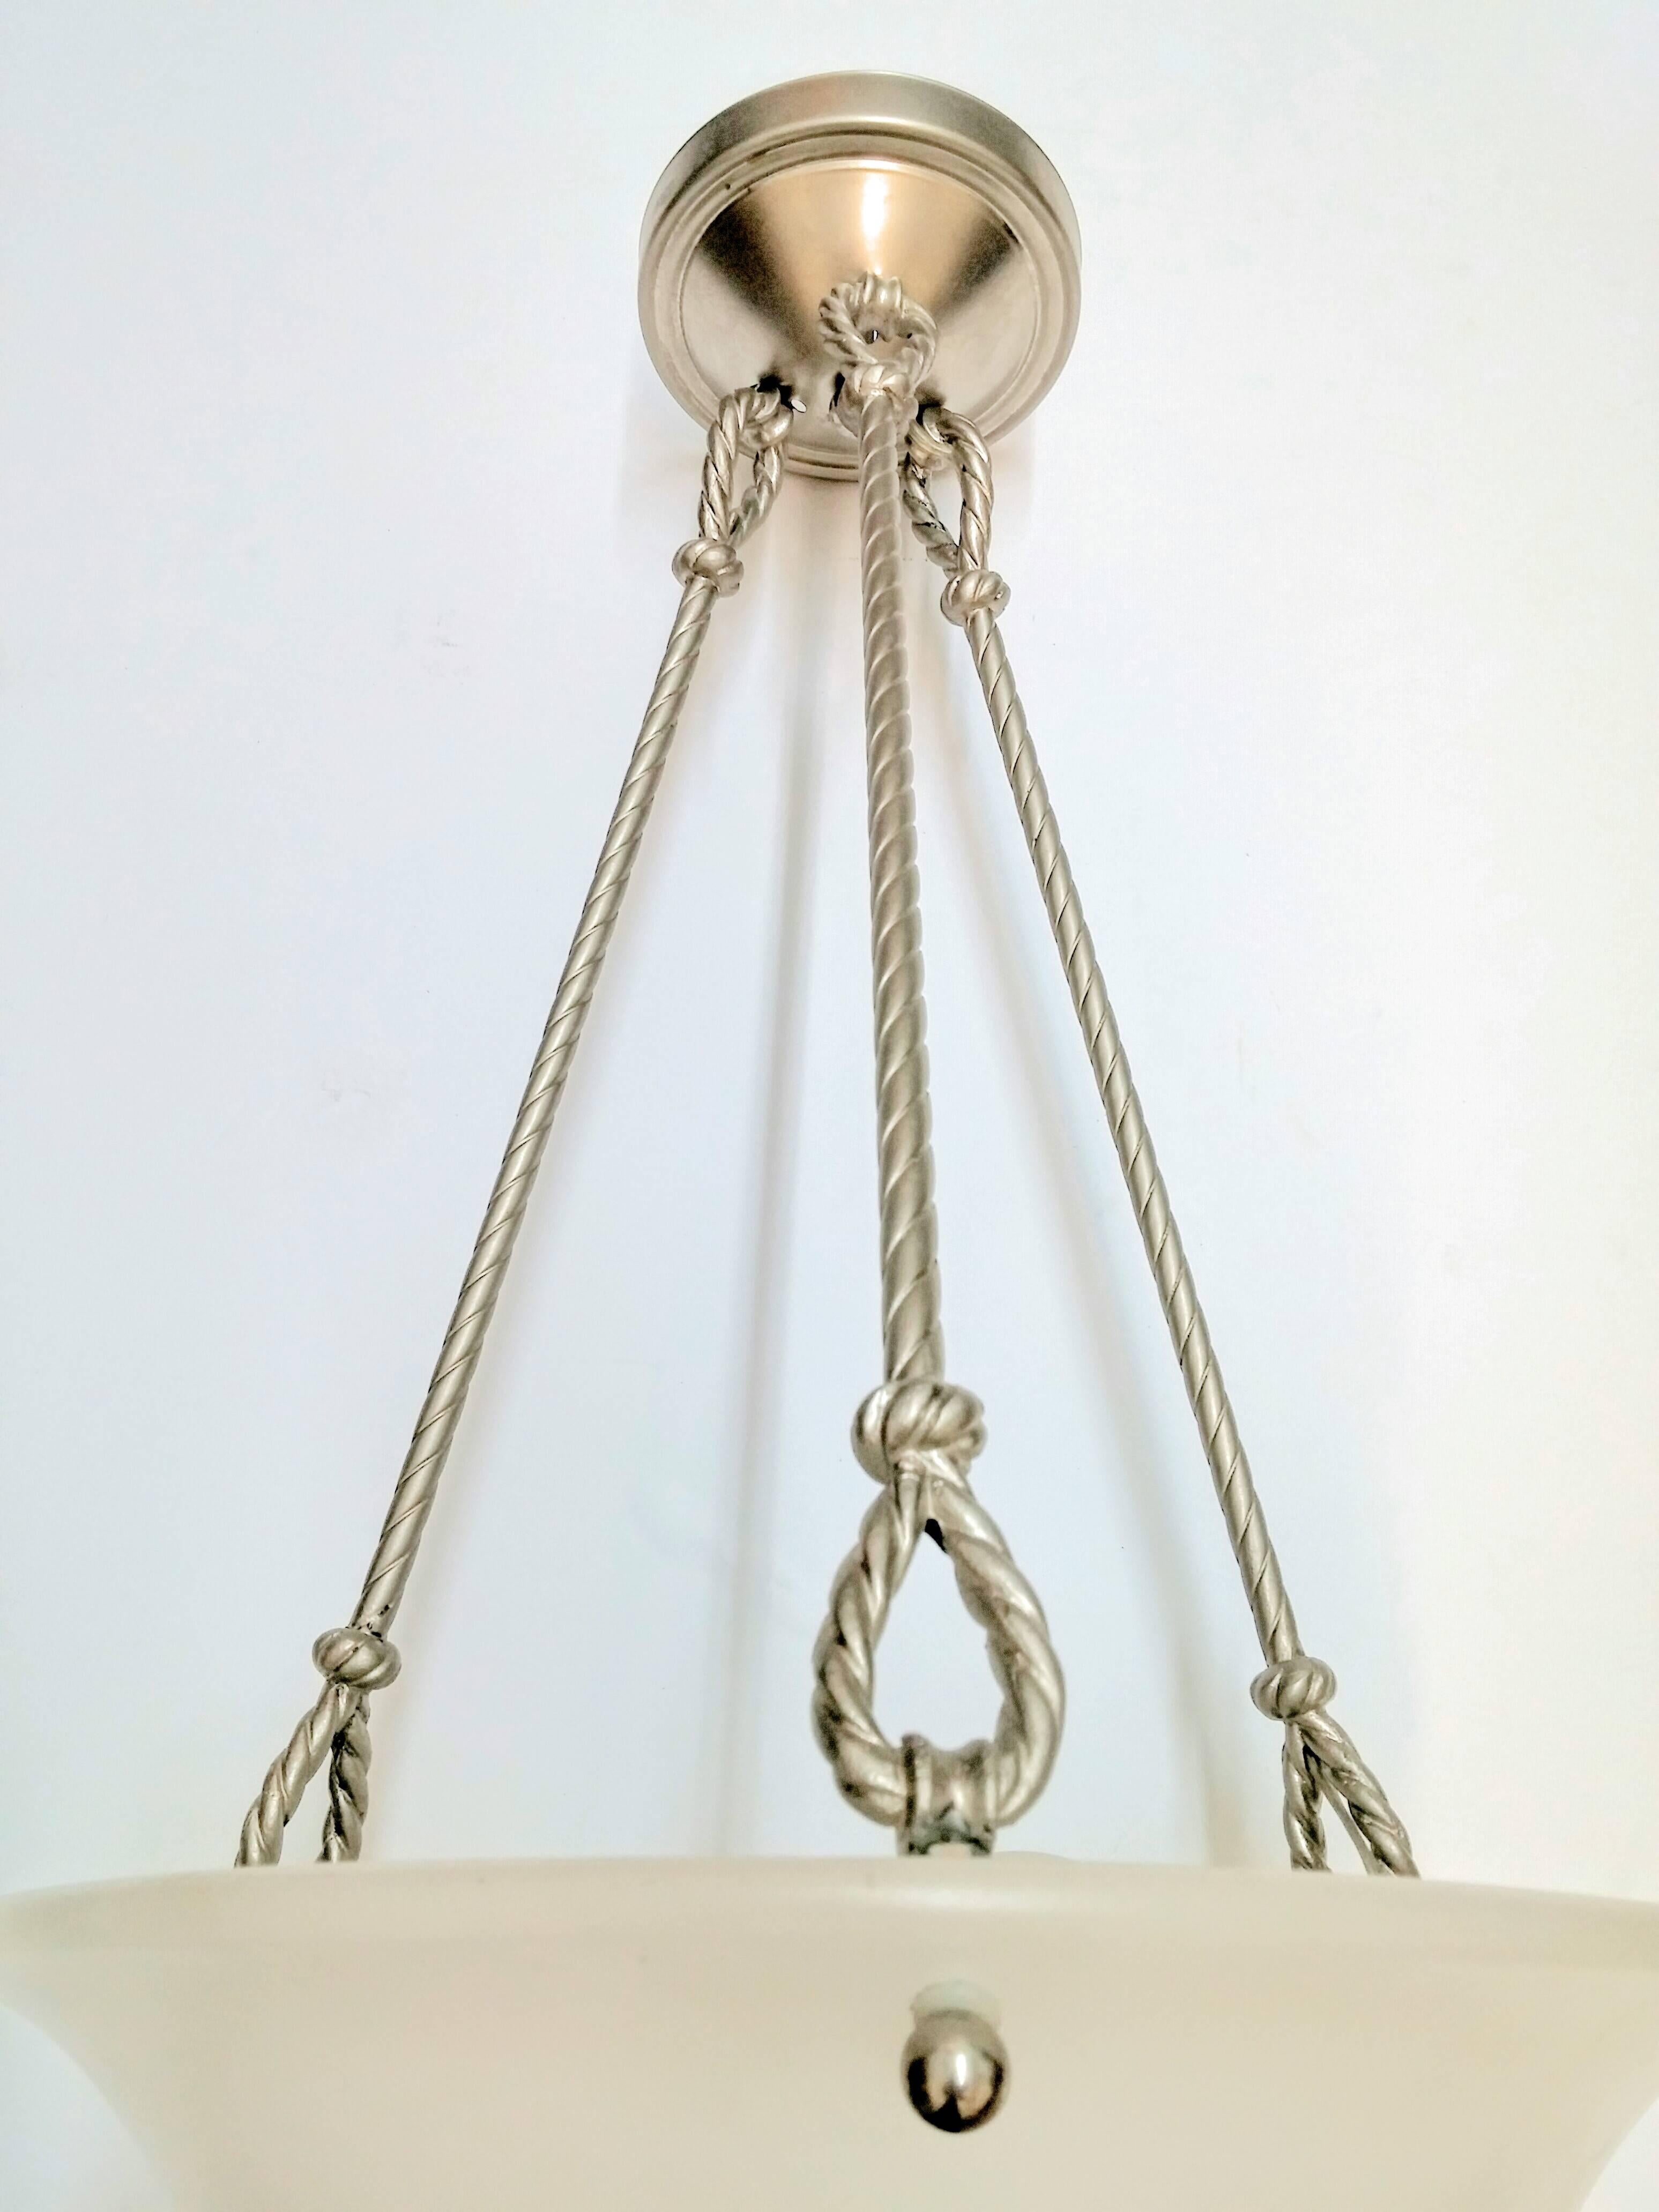 A French Art Deco pendant chandelier with a concave alabaster shade supported by four rods rope design with a smooth canopy in nickel. Pendant can be re-plated or shorten upon request at no additional charge. Alabaster shade can be substituted to